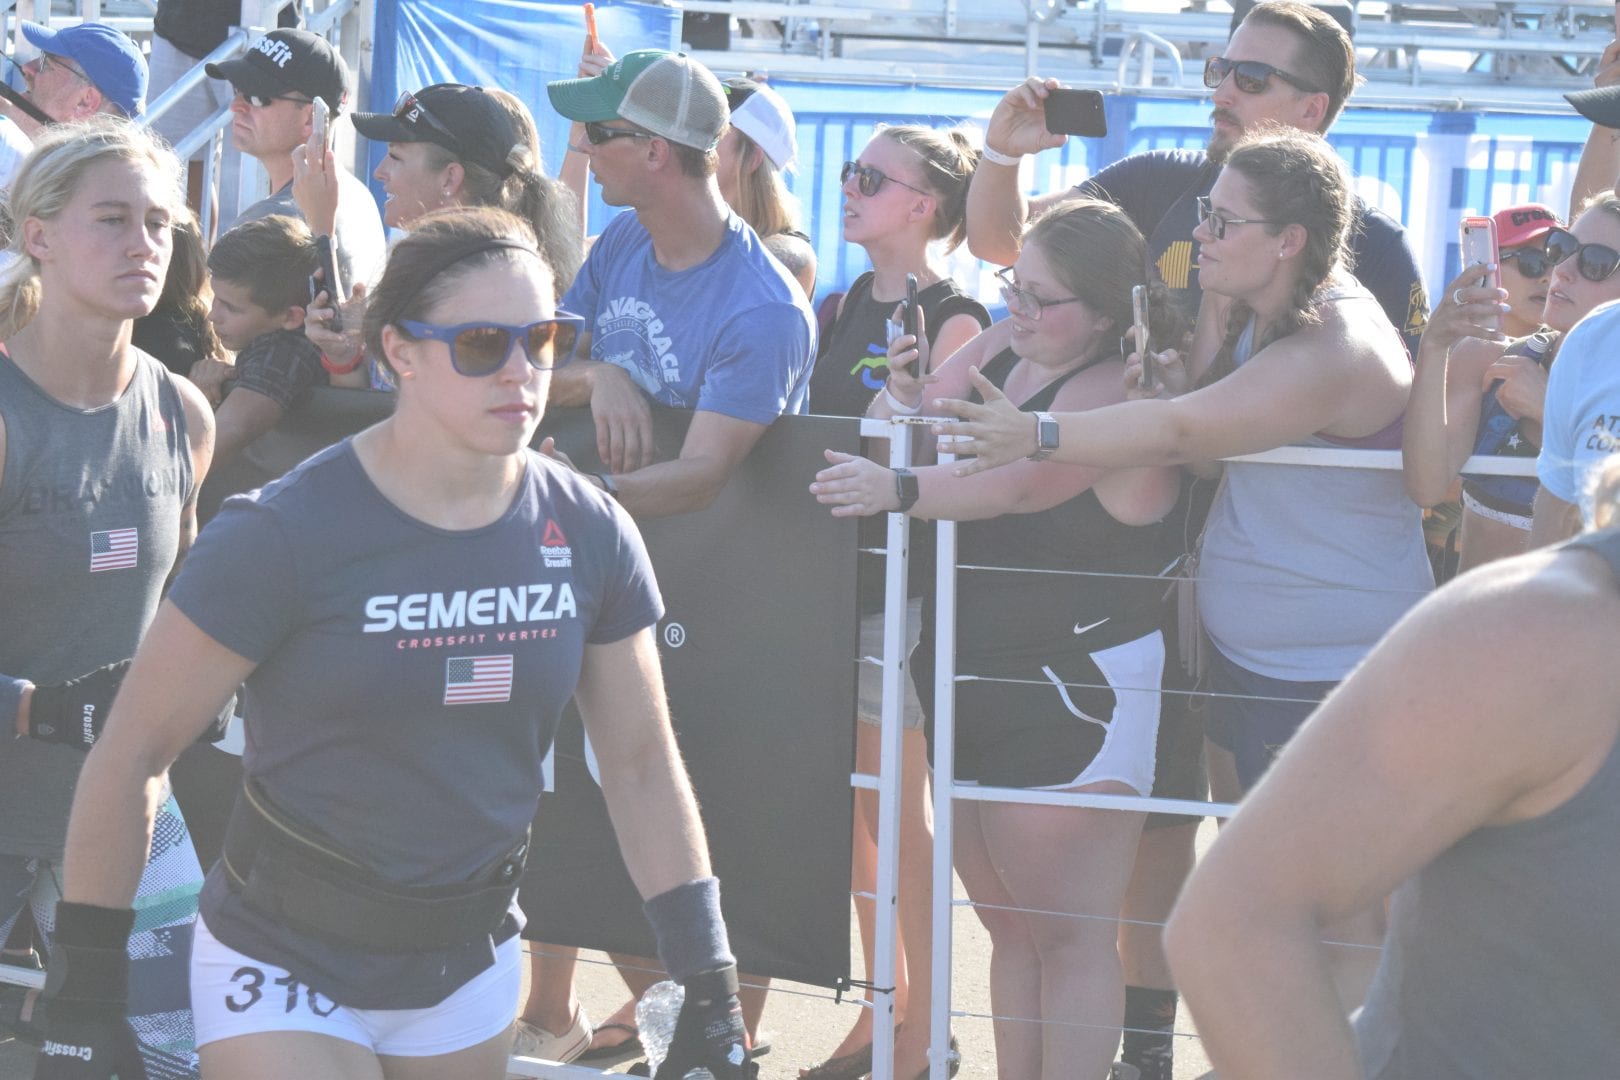 Paige Semenza competes in the Ruck Run event at the 2019 CrossFit Games.